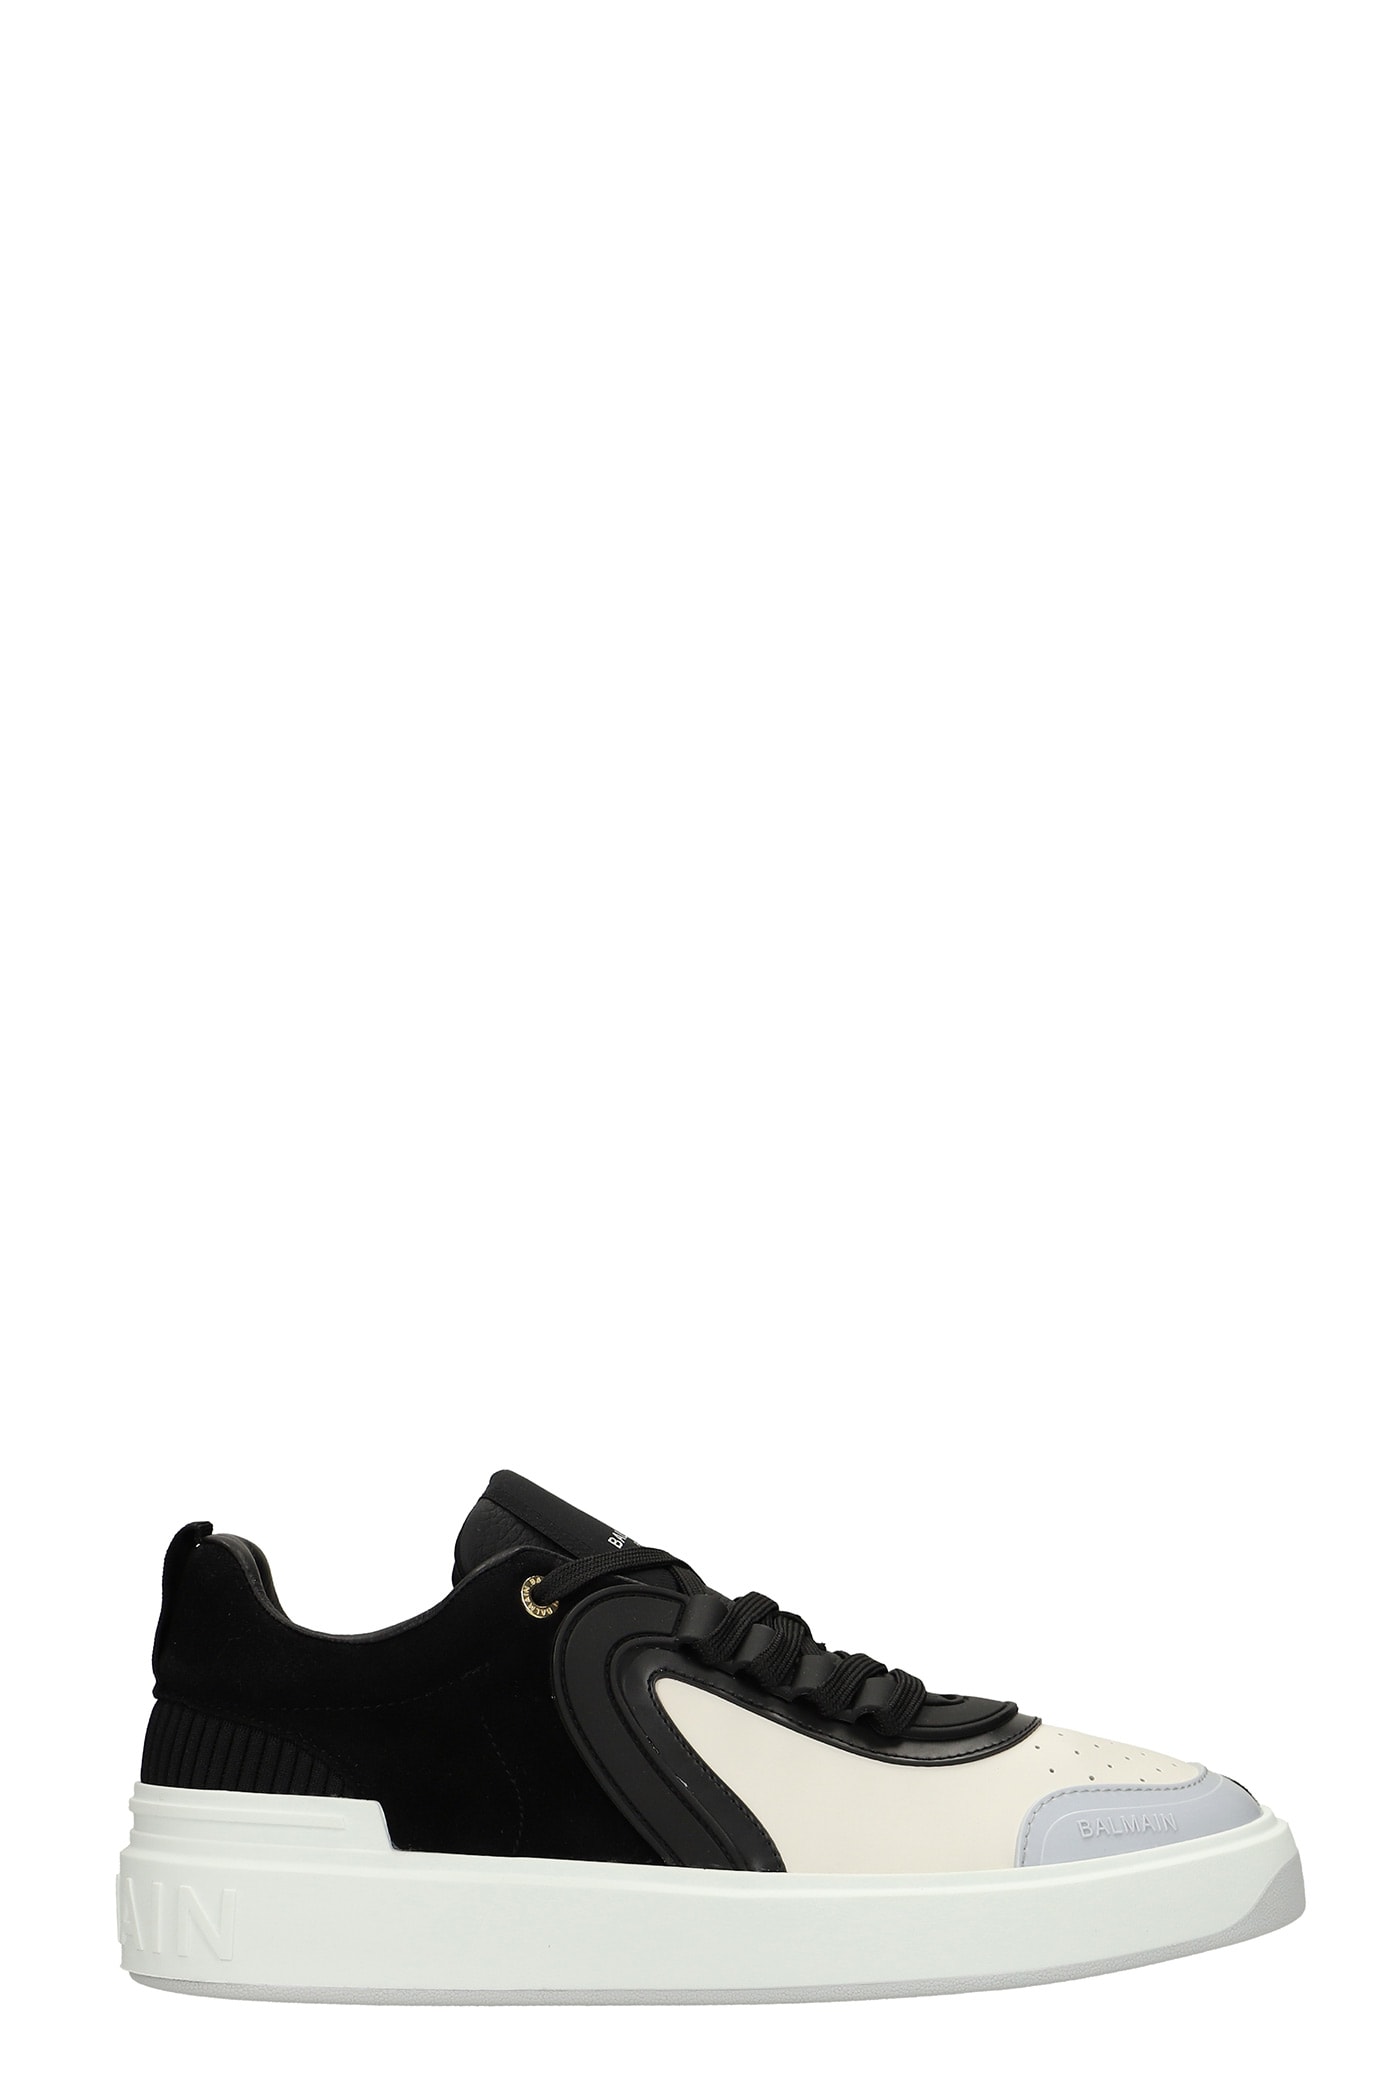 Balmain B-skate High Heels Ankle Boots In Black Suede And Leather